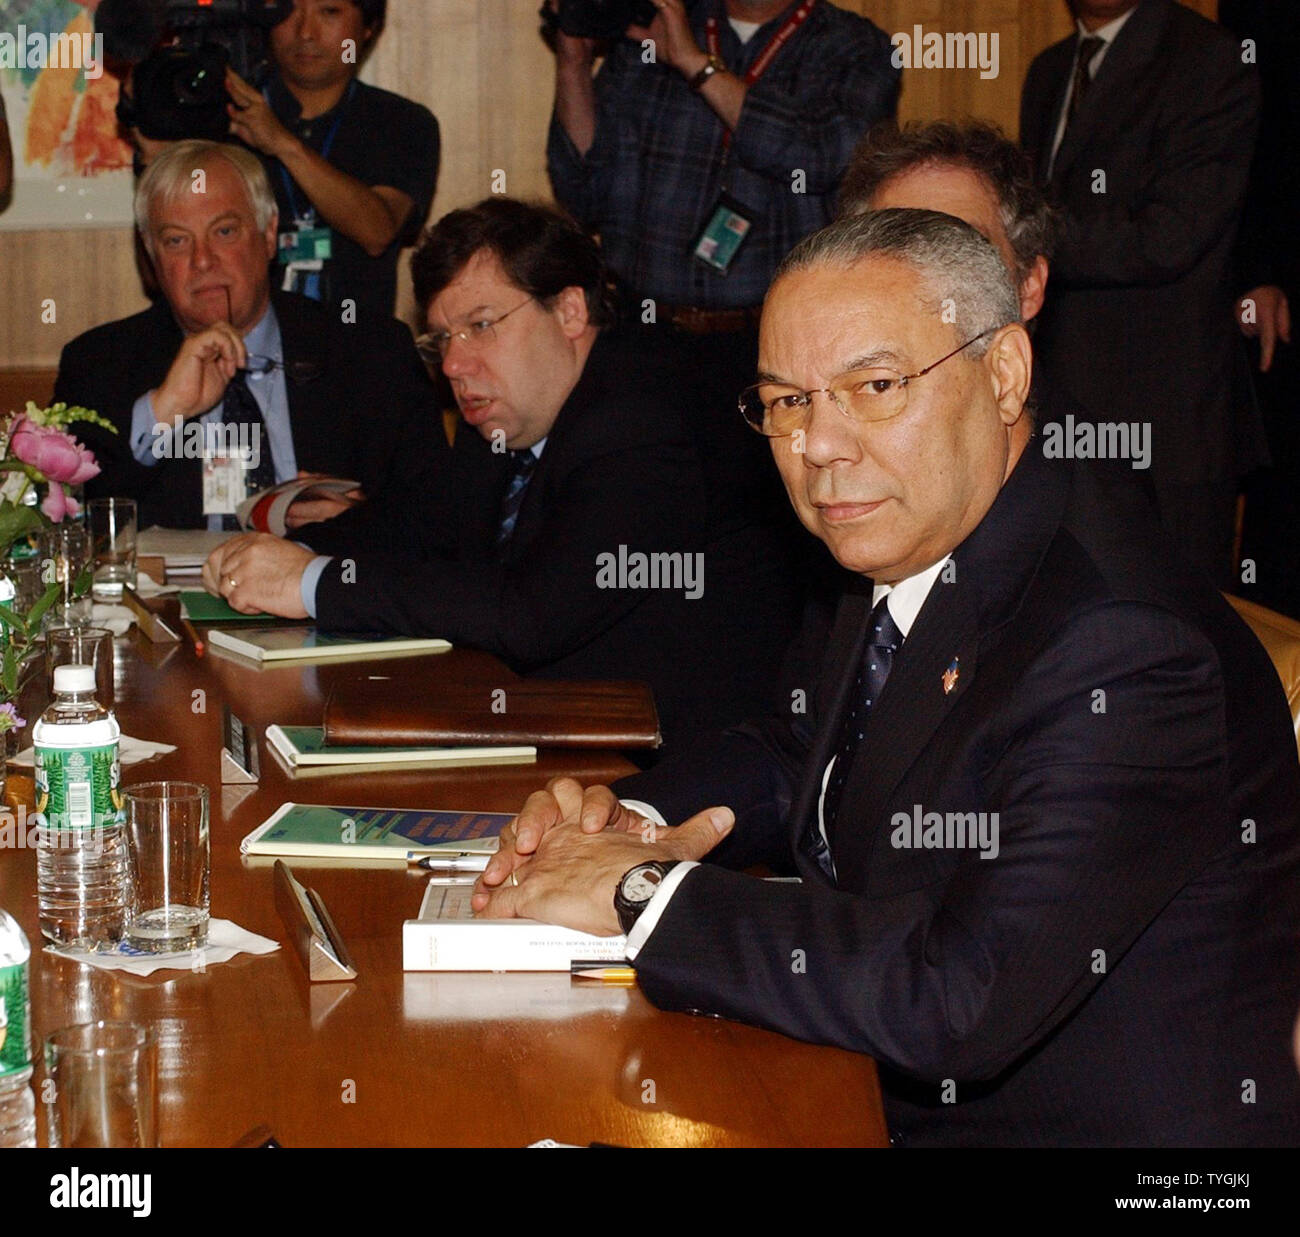 U.S. Secretary of State Colin Powell (foreground) and Brian Cowan, Foreign Minister of Ireland (head of table) take part in the  Middle East Quartet meetings on May 4, 2004  at the United Nations. (UPI/Ezio Petersen) Stock Photo